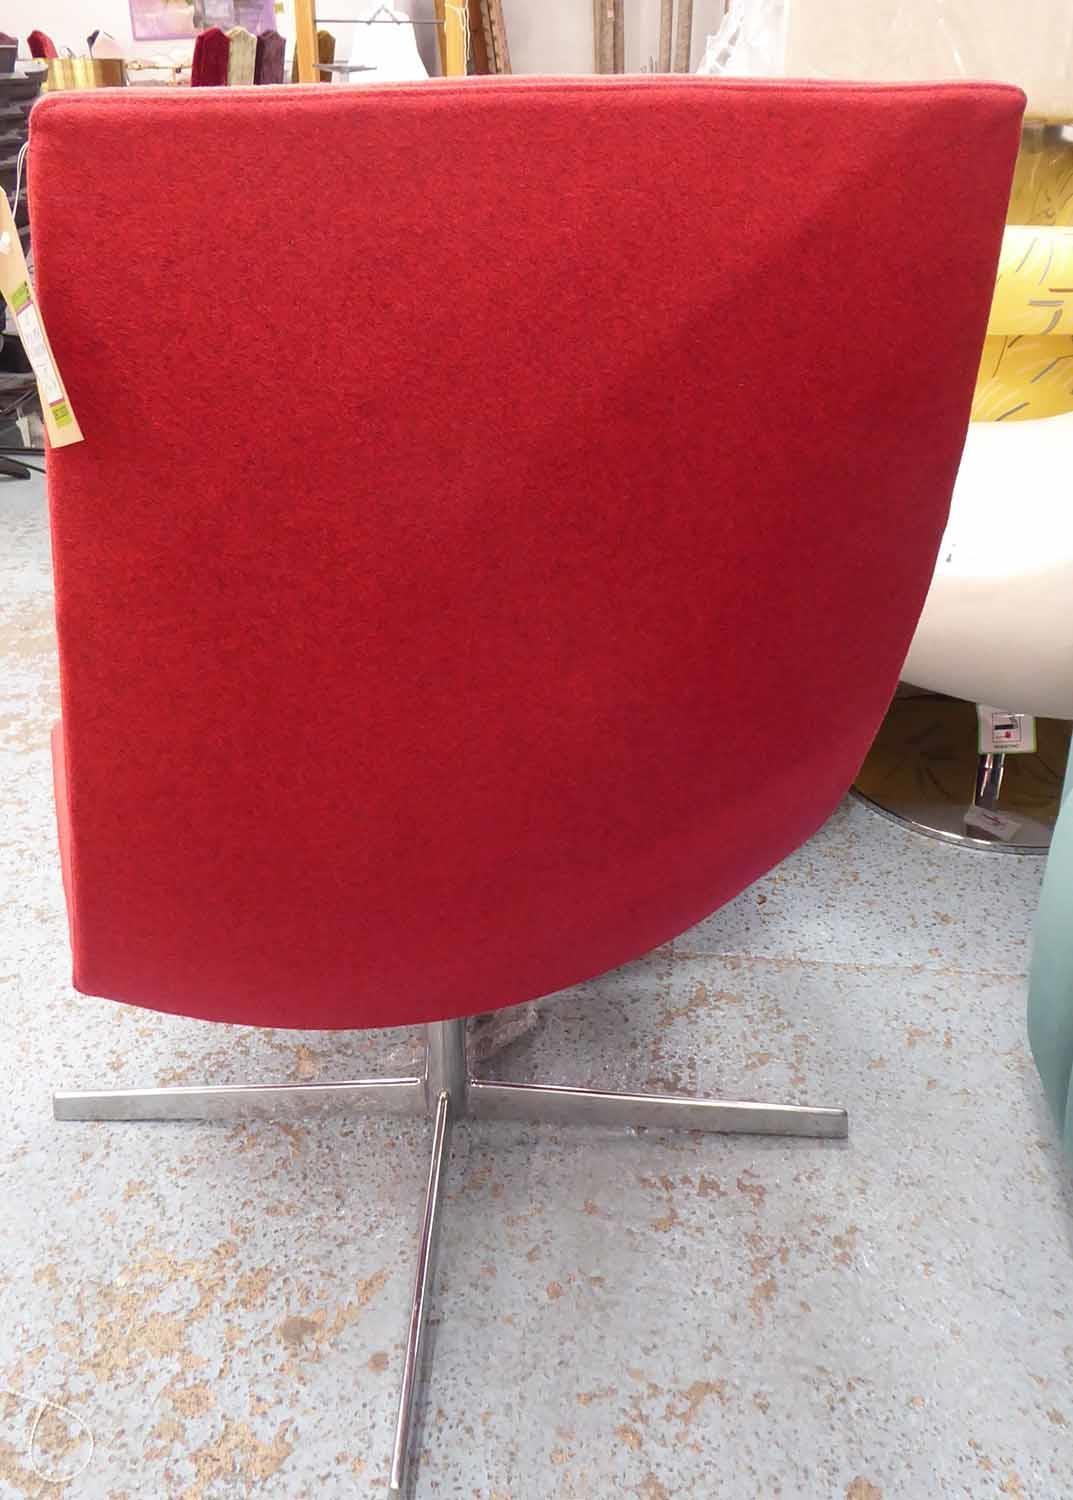 ARPER CATIFA 70 LOUNGE CHAIR, by Alberto Lievore, Jeannette Altherr and Manuel Molina, red finish, - Image 3 of 3